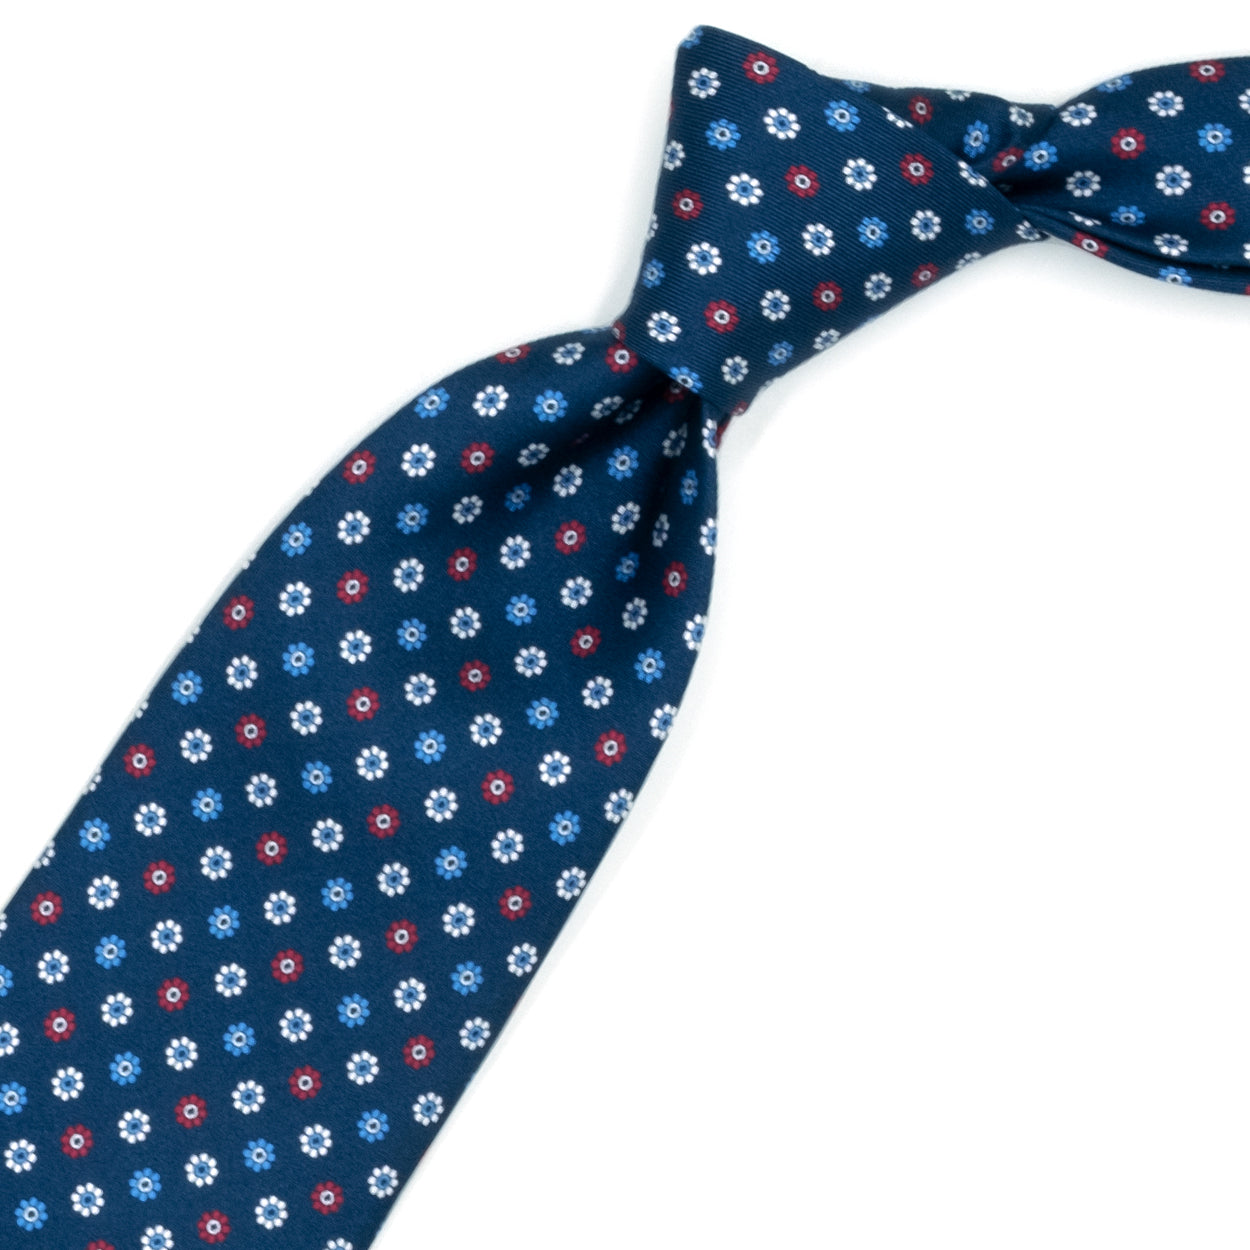 Blue tie with white, red and blue flowers